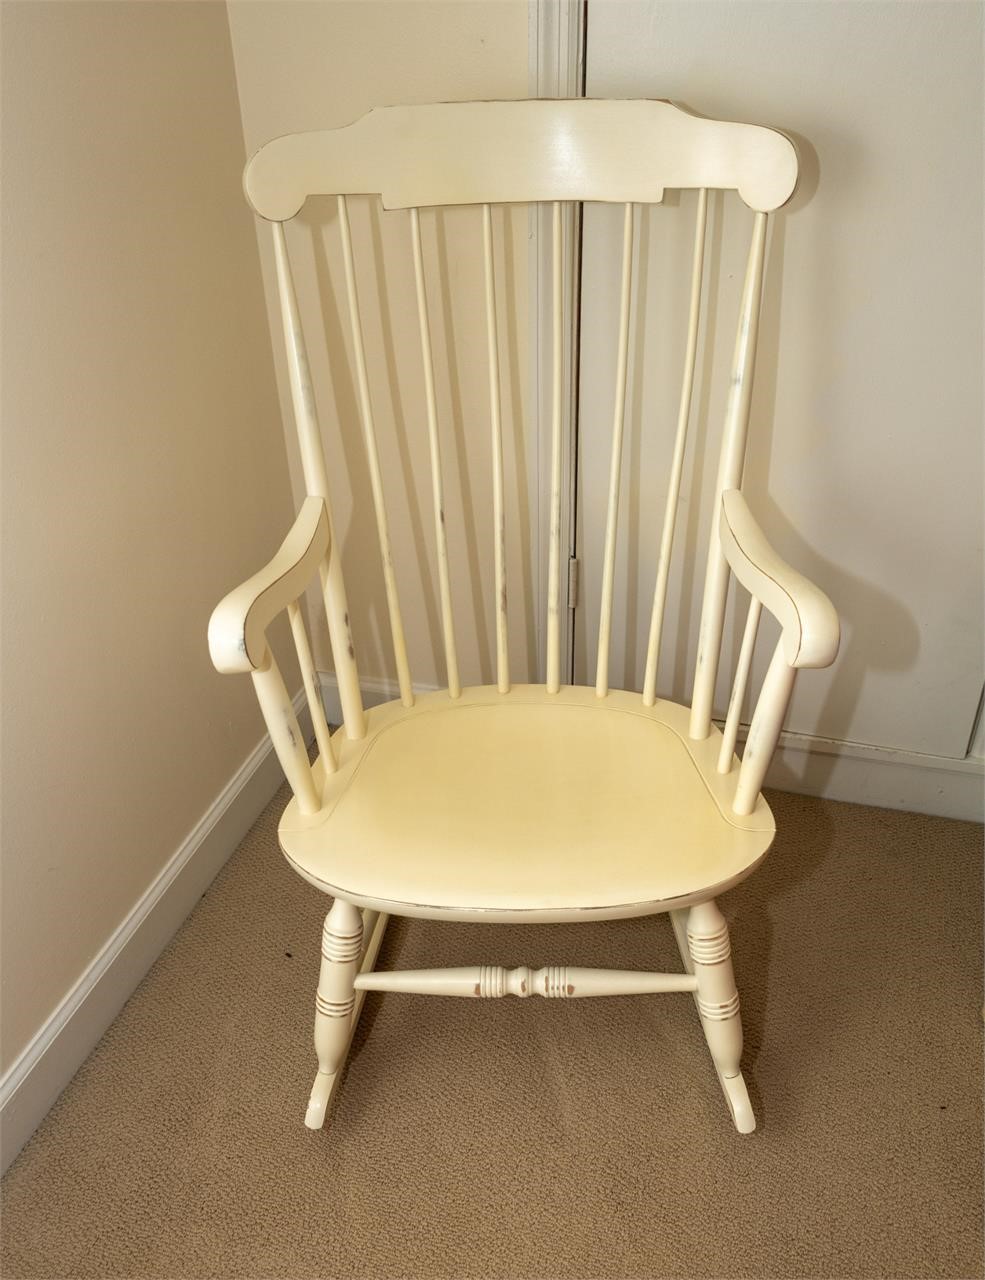 Nichols & Sons white painted rocking chair